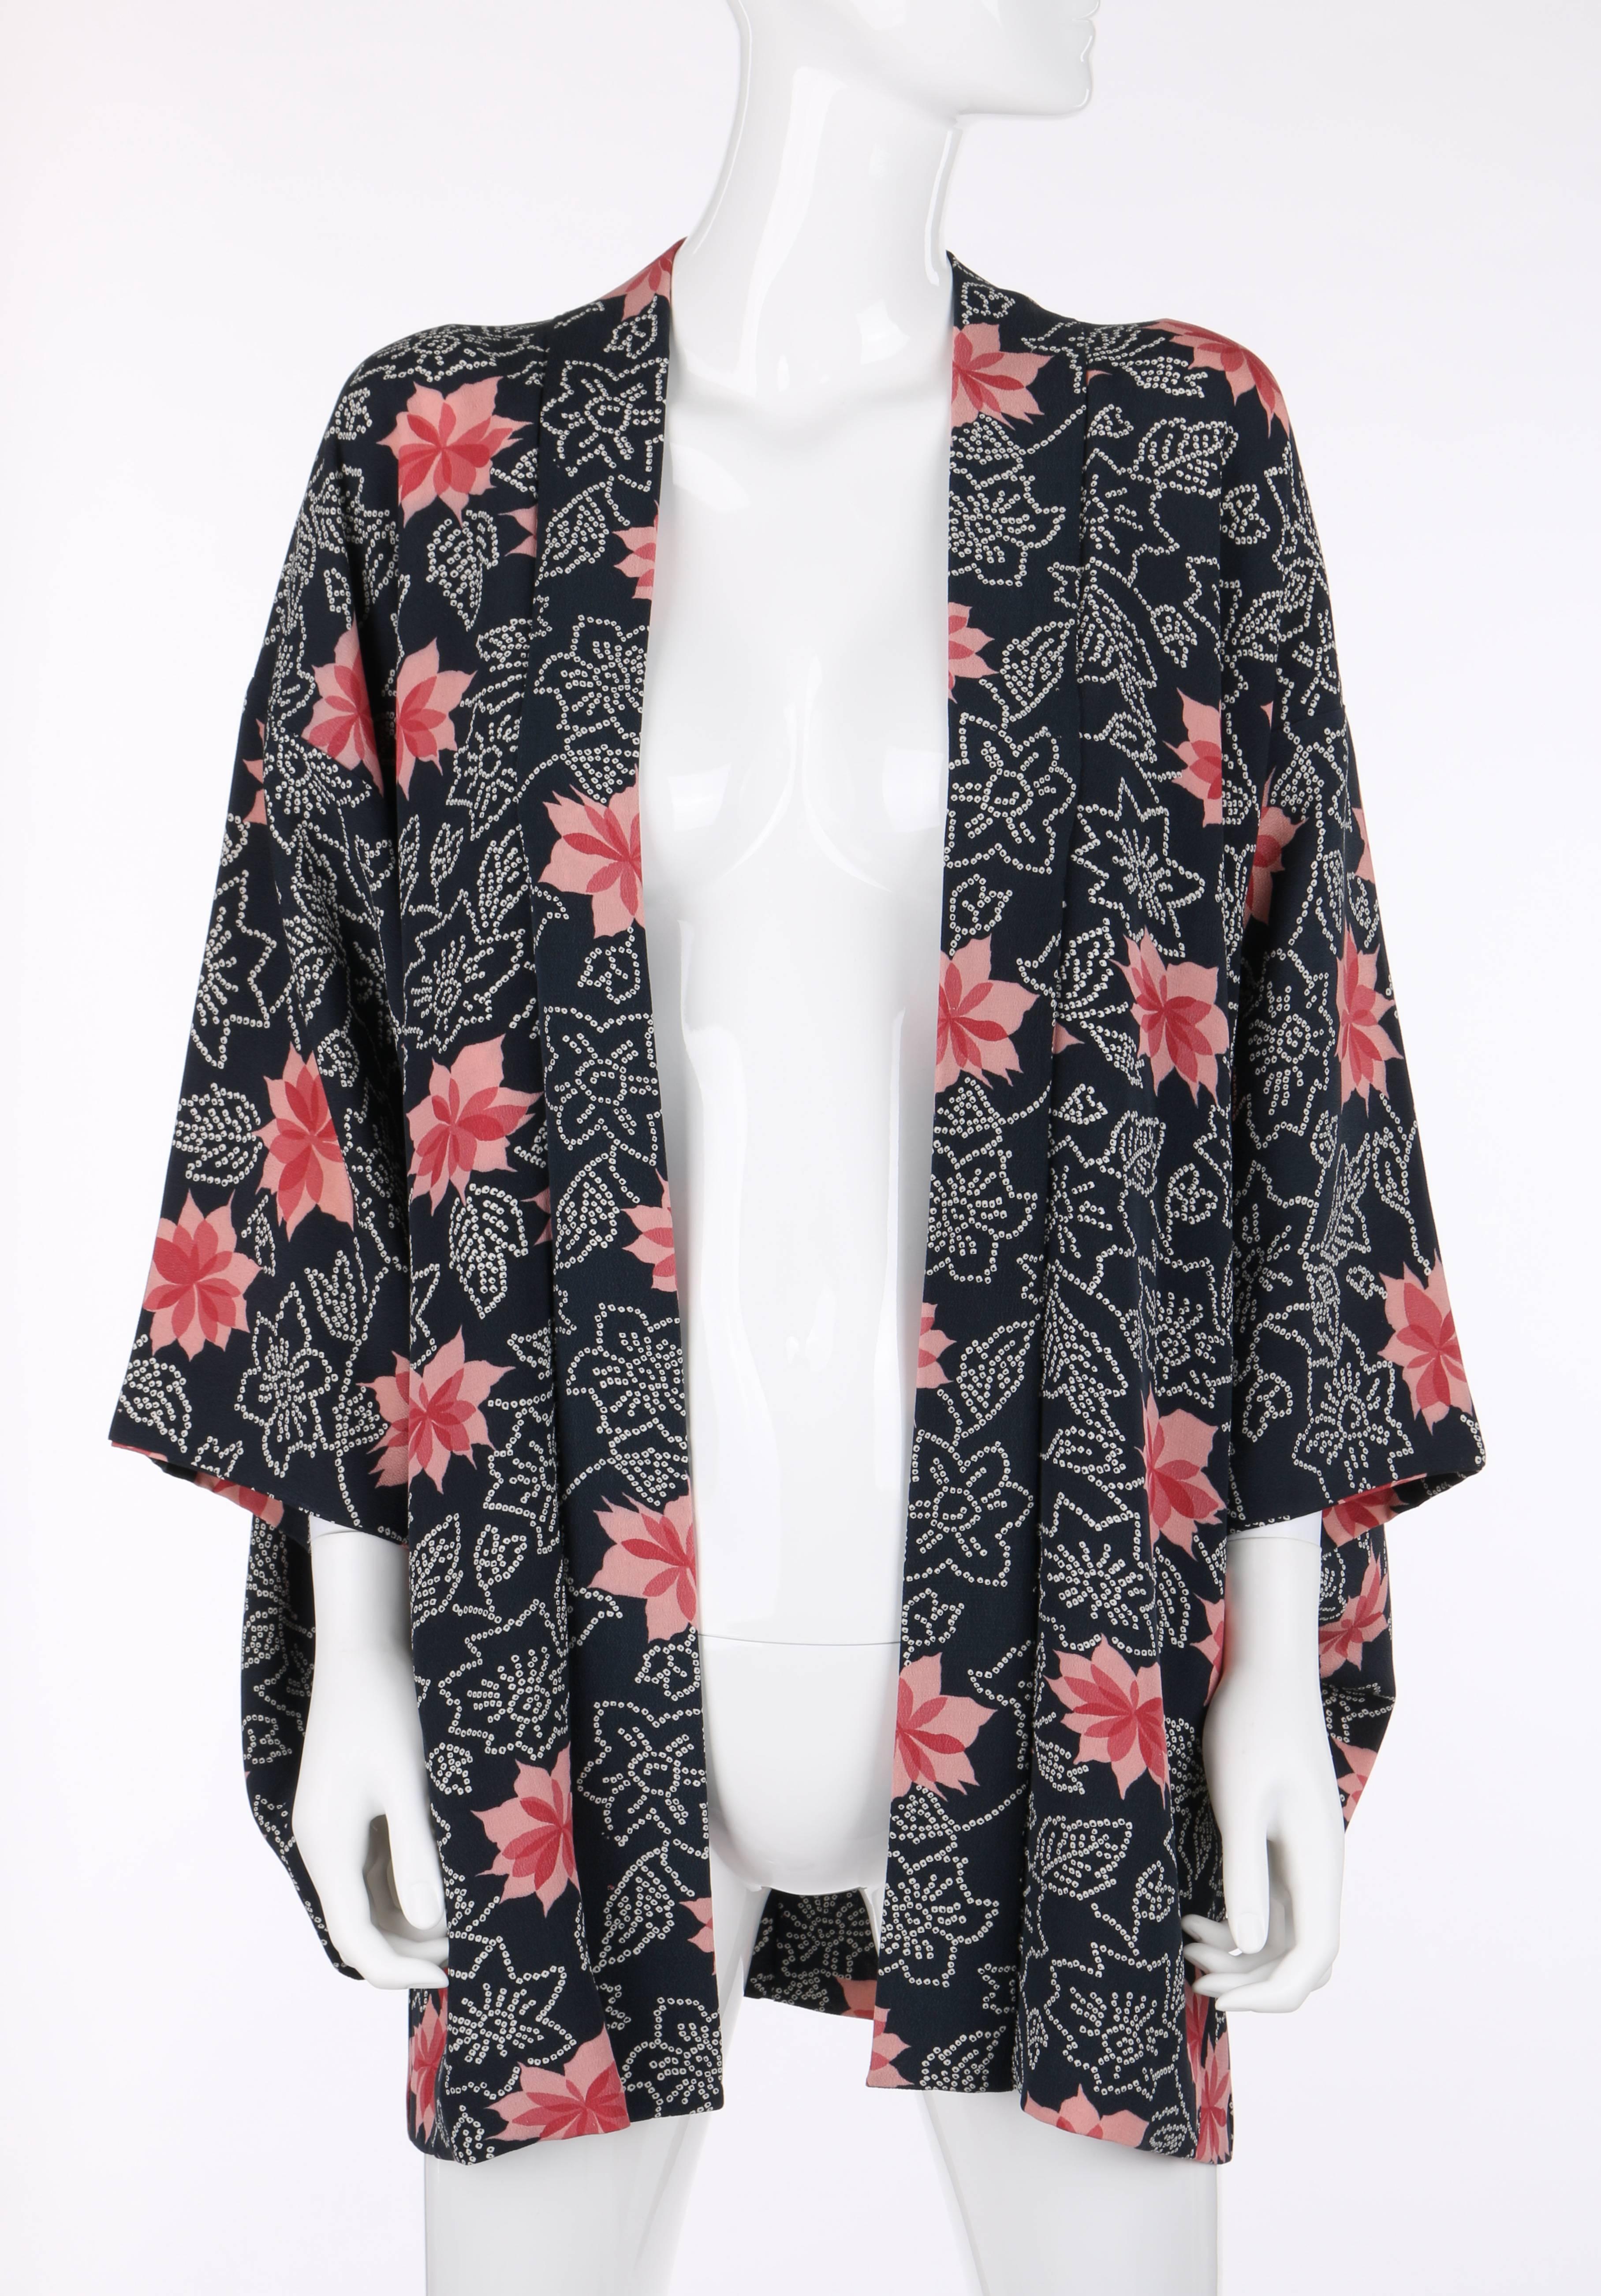 Vintage one-of-a-kind c.1940's floral rayon crepe haori. Midnight blue with white and pink all over floral water lily print. Full kimono sleeves. Matching eri collar. Partially lined in winter white floral print lining. Two interior loops for ties.